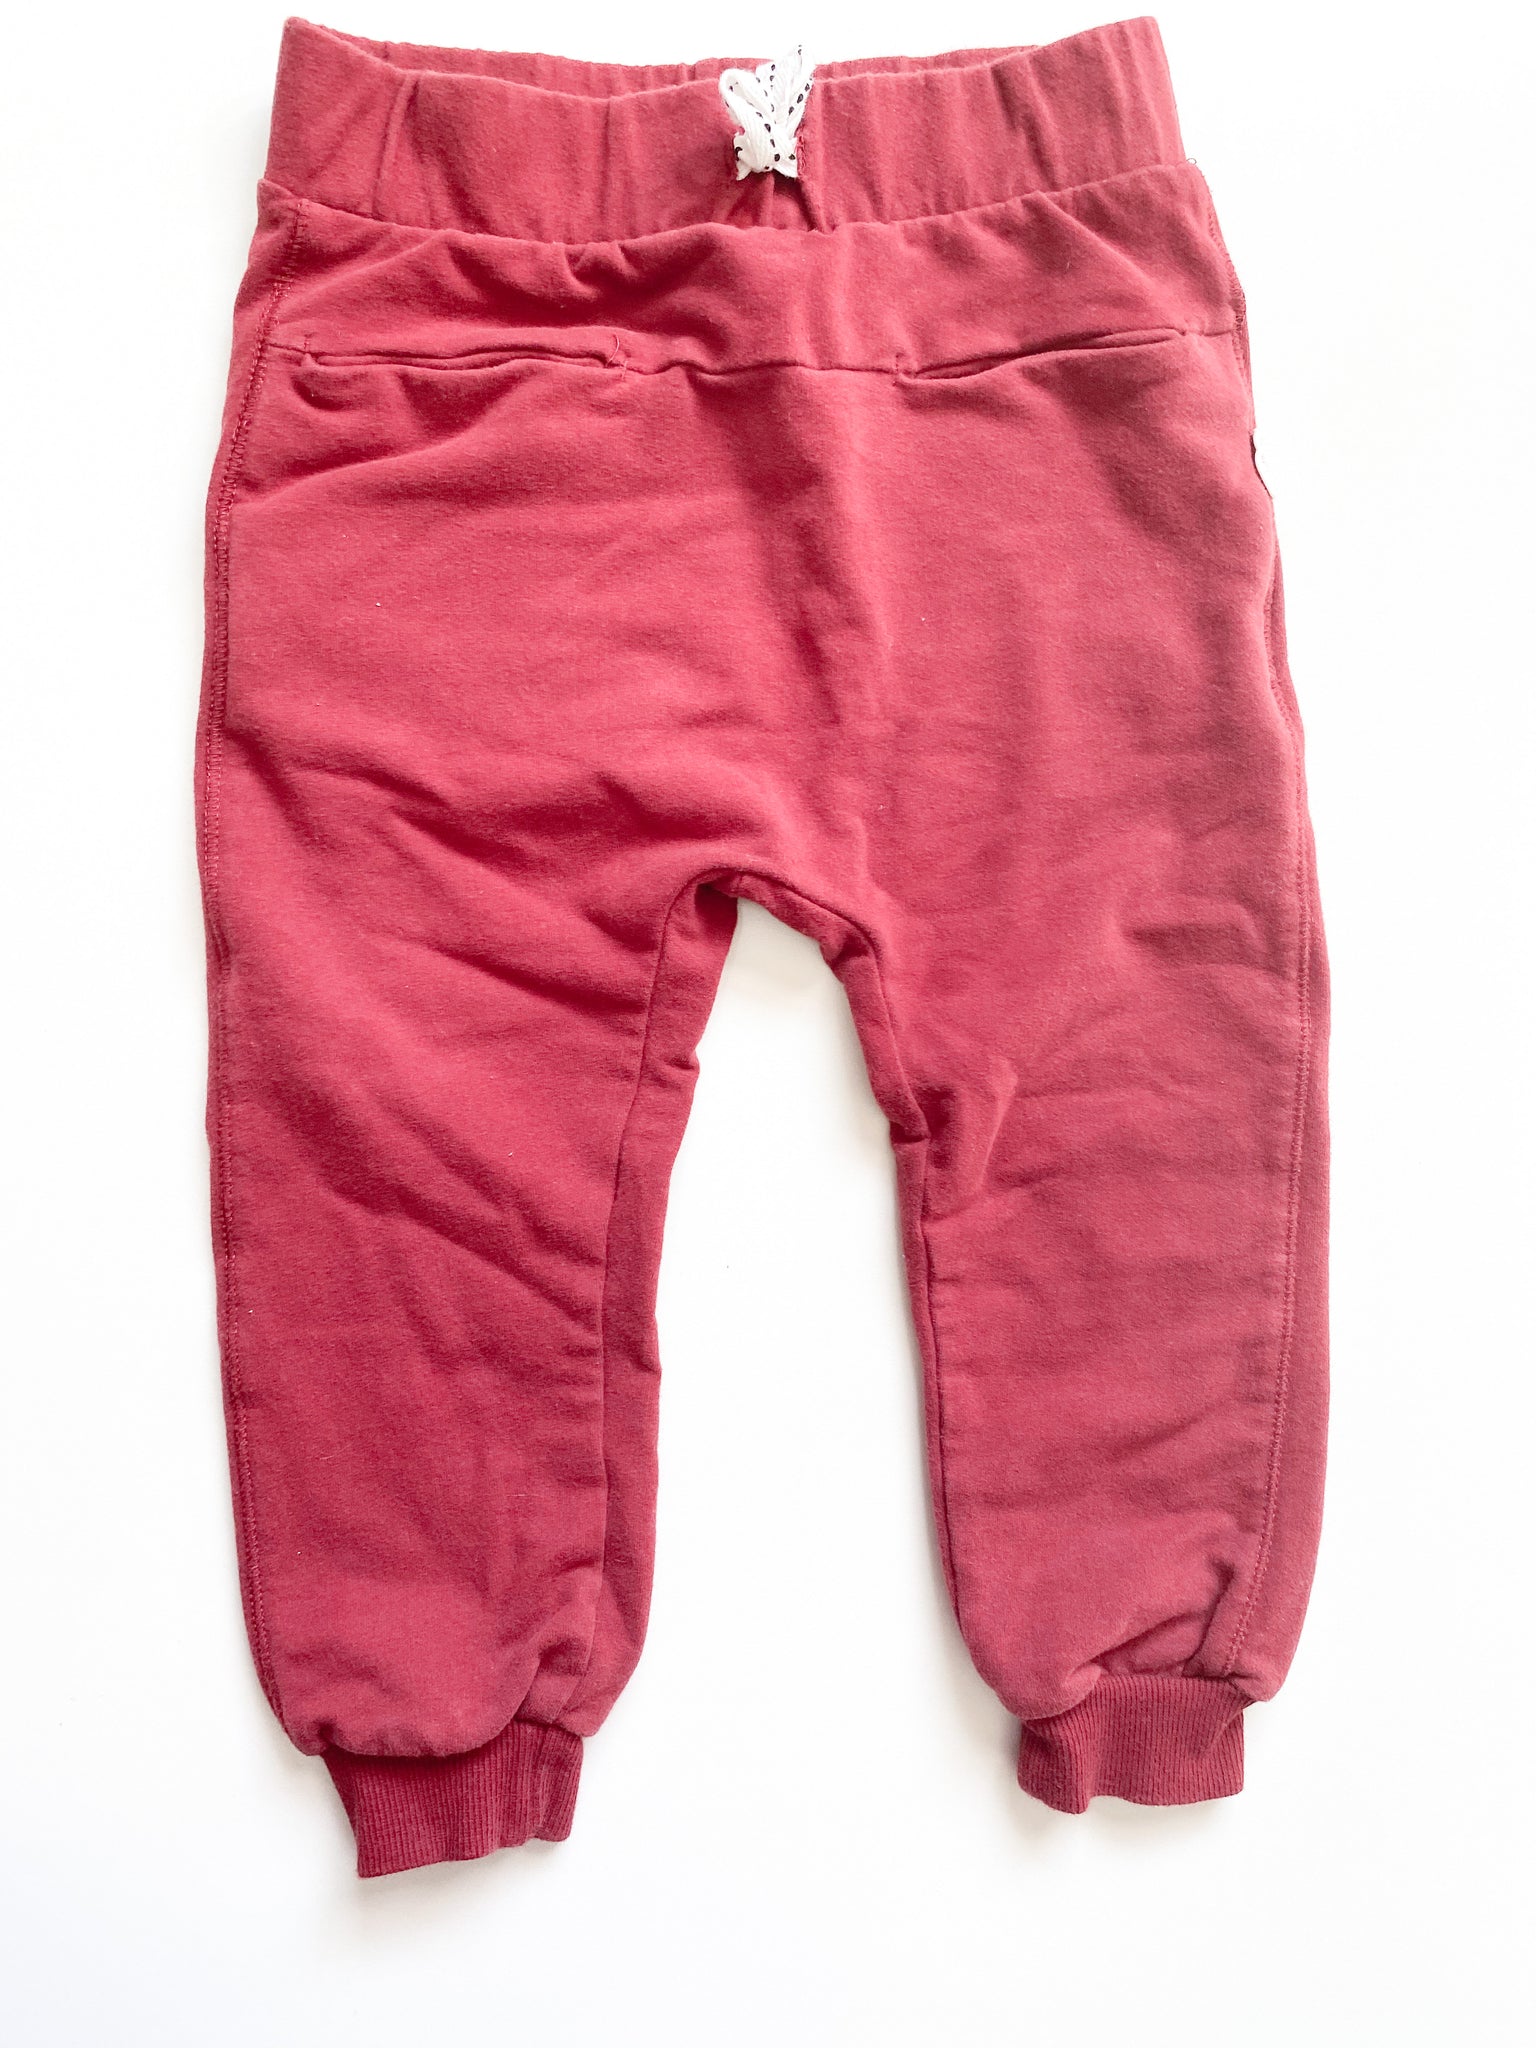 Joggers - Red (3T)